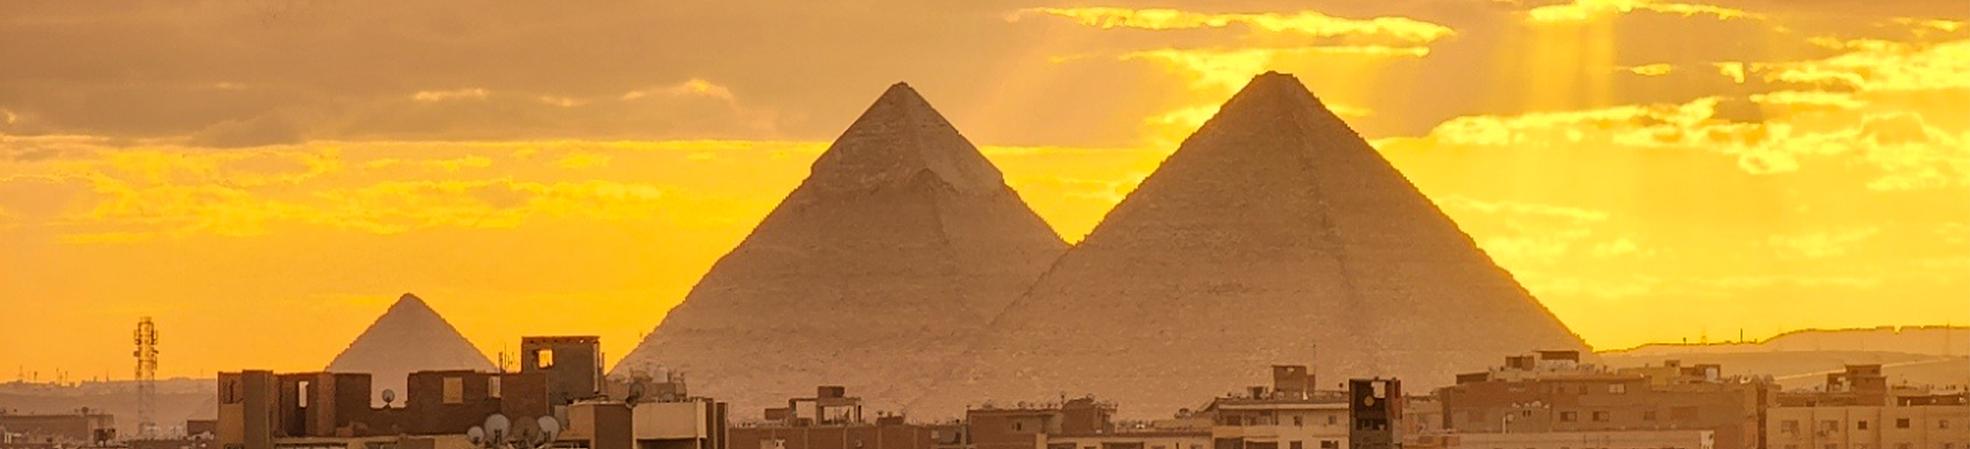 The Great Pyramid of Giza in Egypt